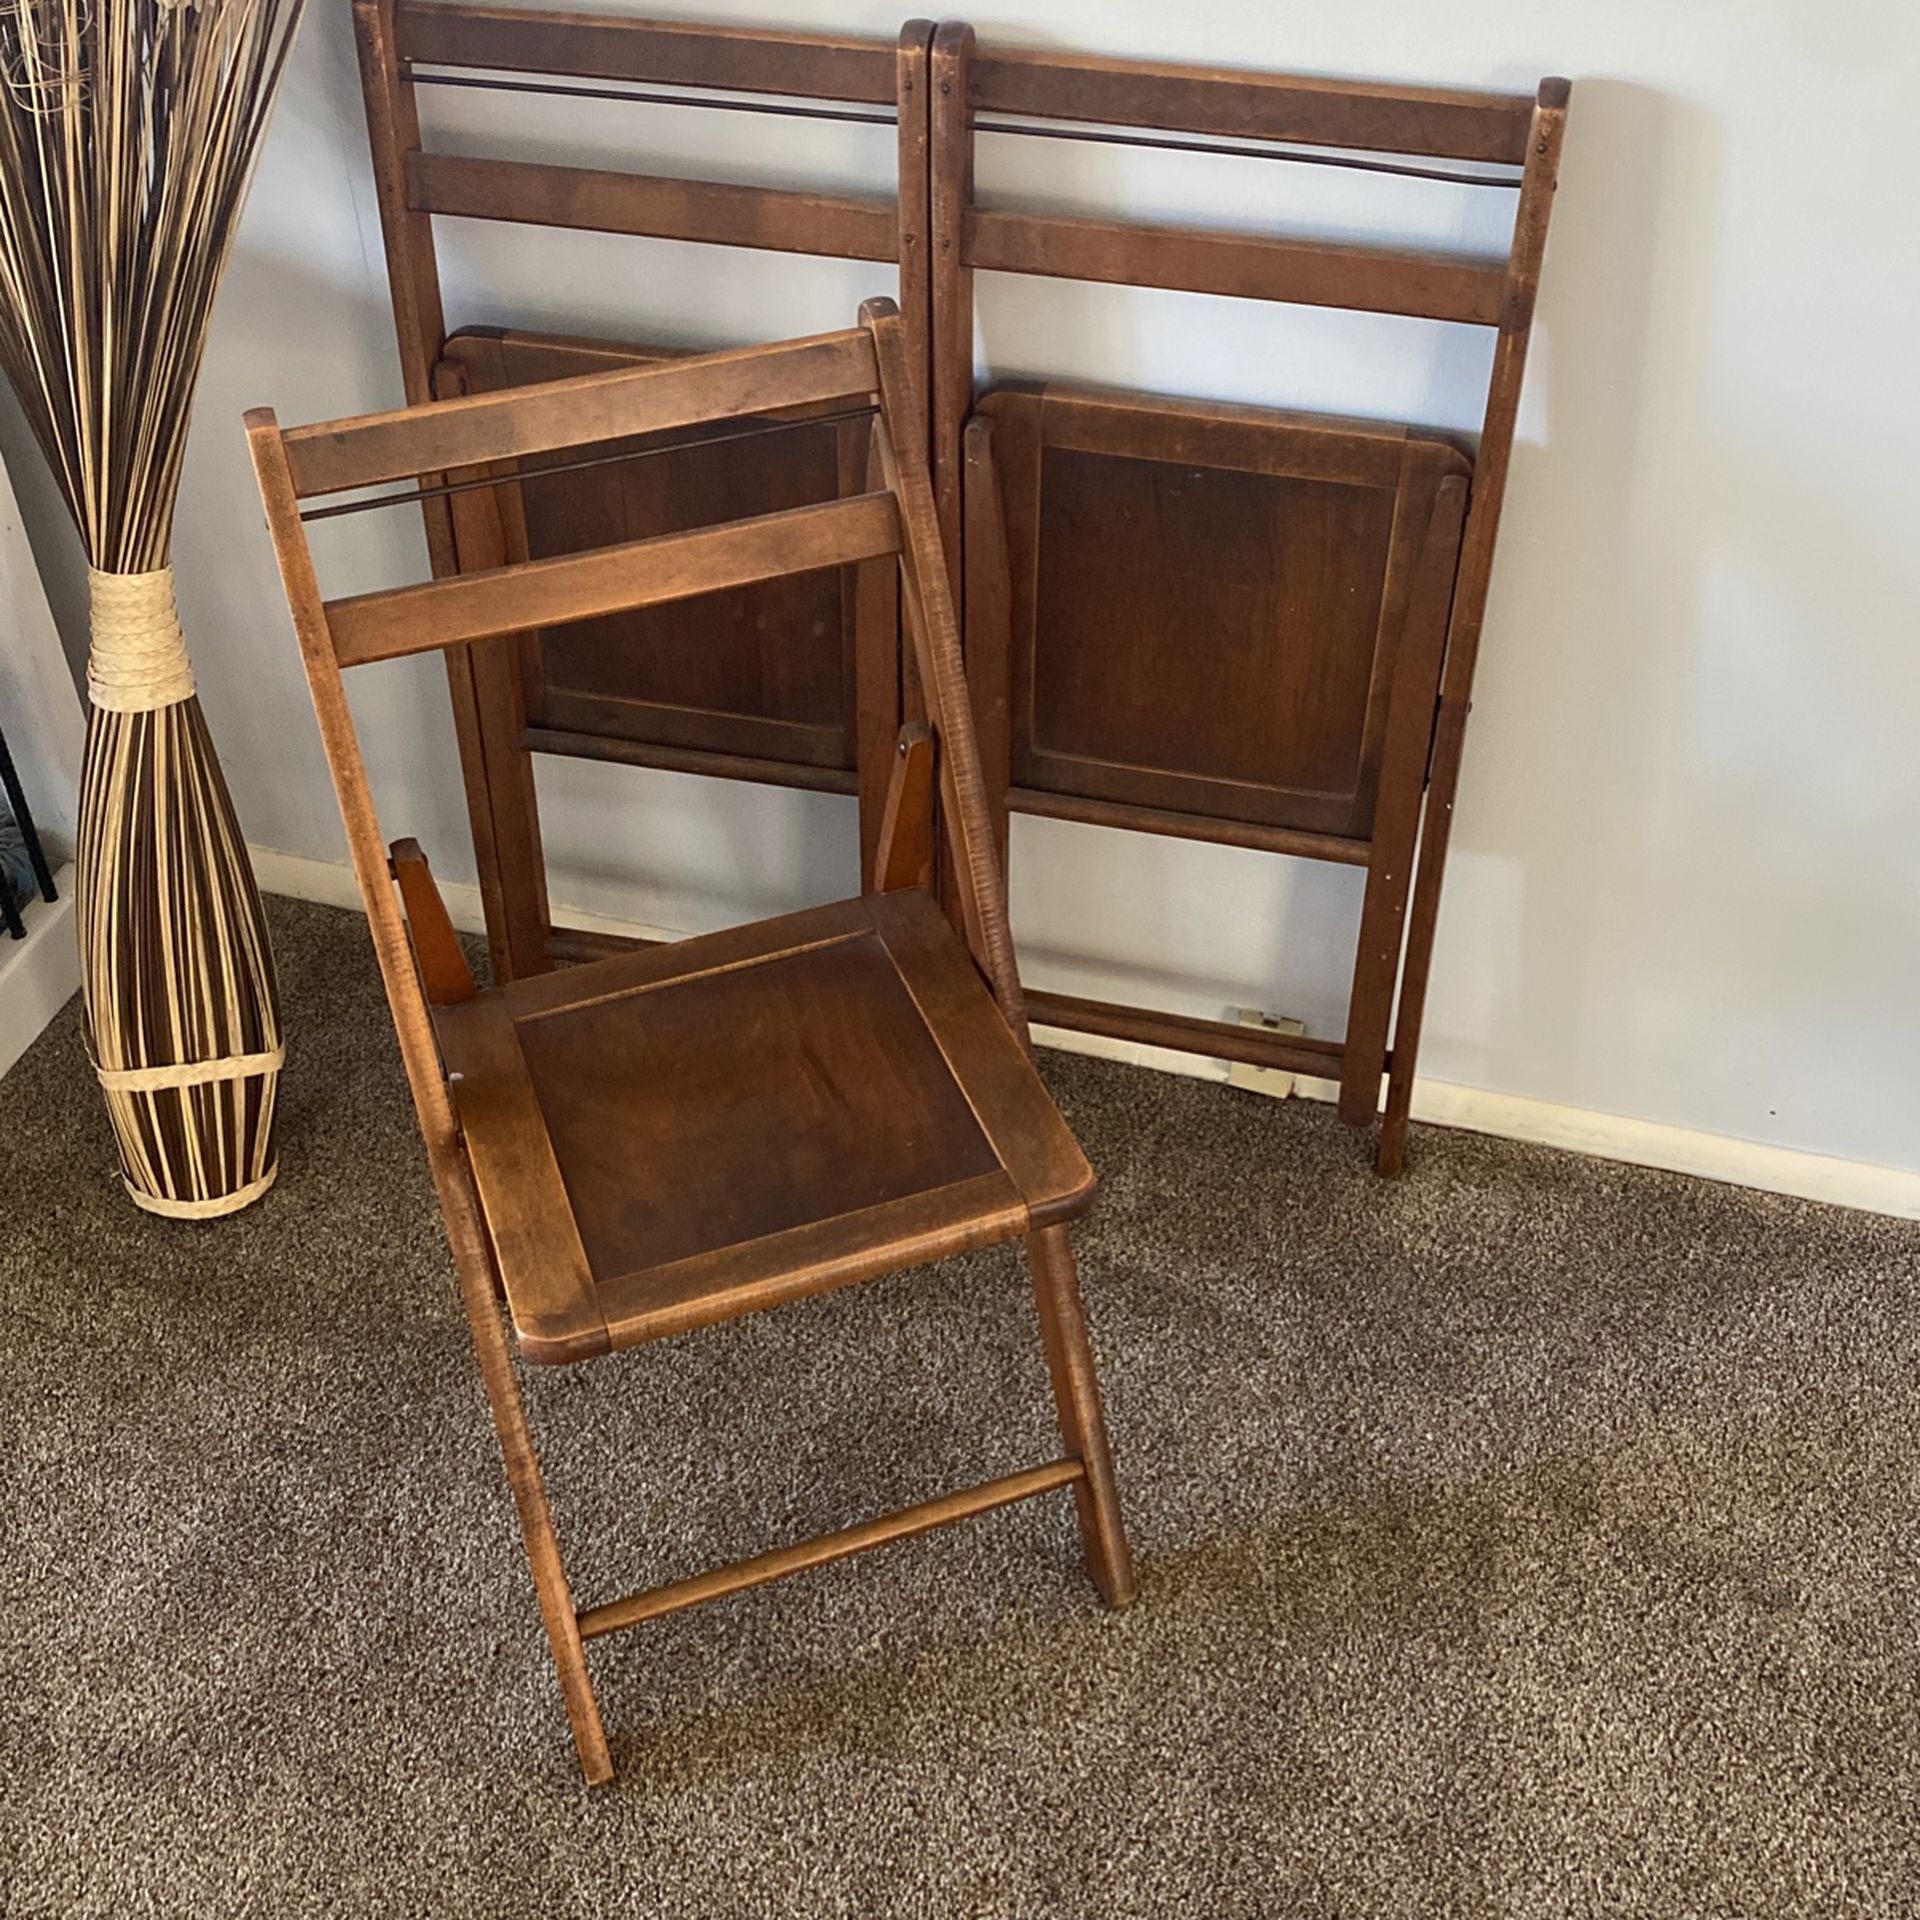 3 Vintage Wood Folding Chairs All Work Good And Are In Good Shape Just Old